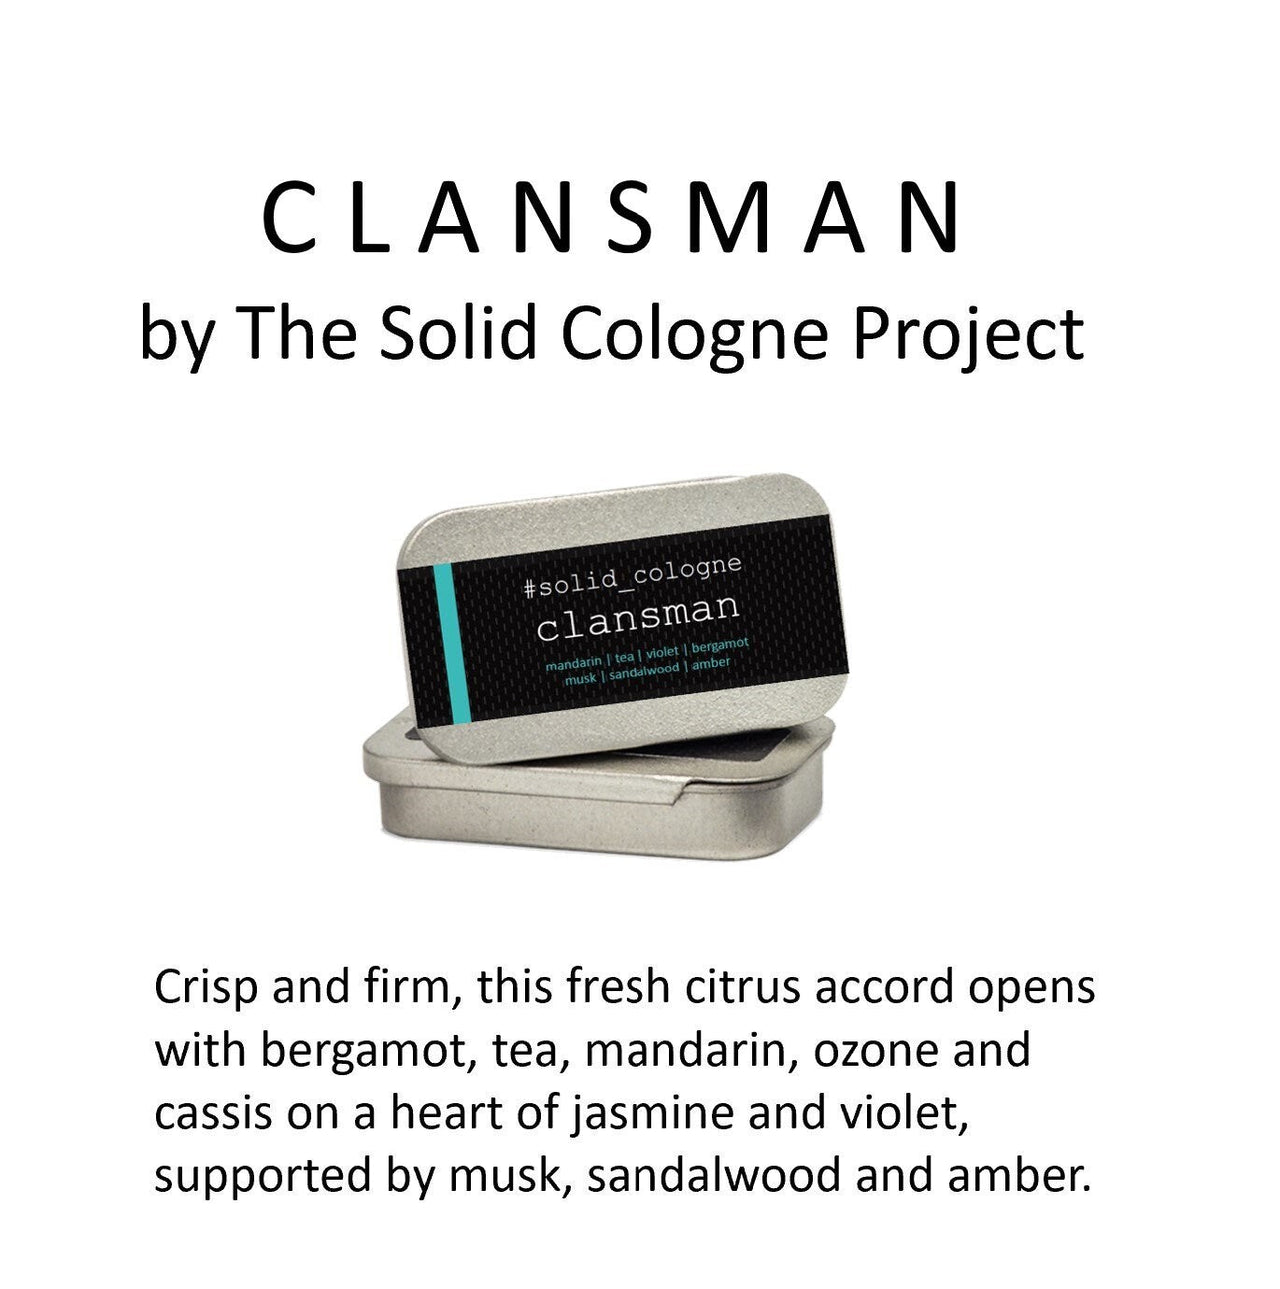 Clansman | Solid Cologne - Made Scotland